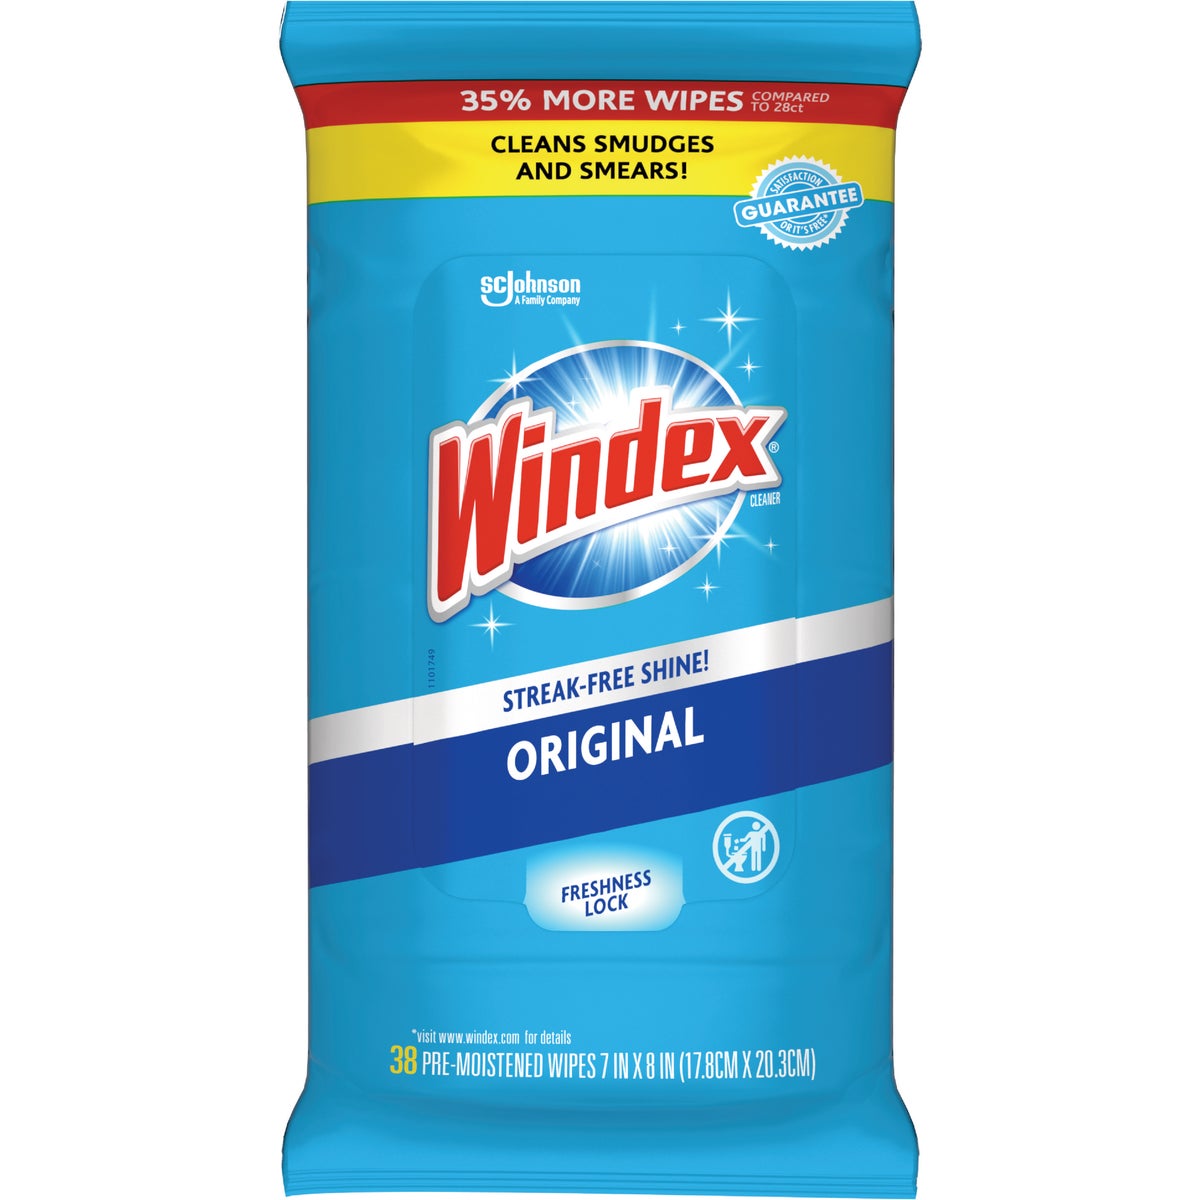 Windex Original Glass Cleaner Wipes (38-Count)